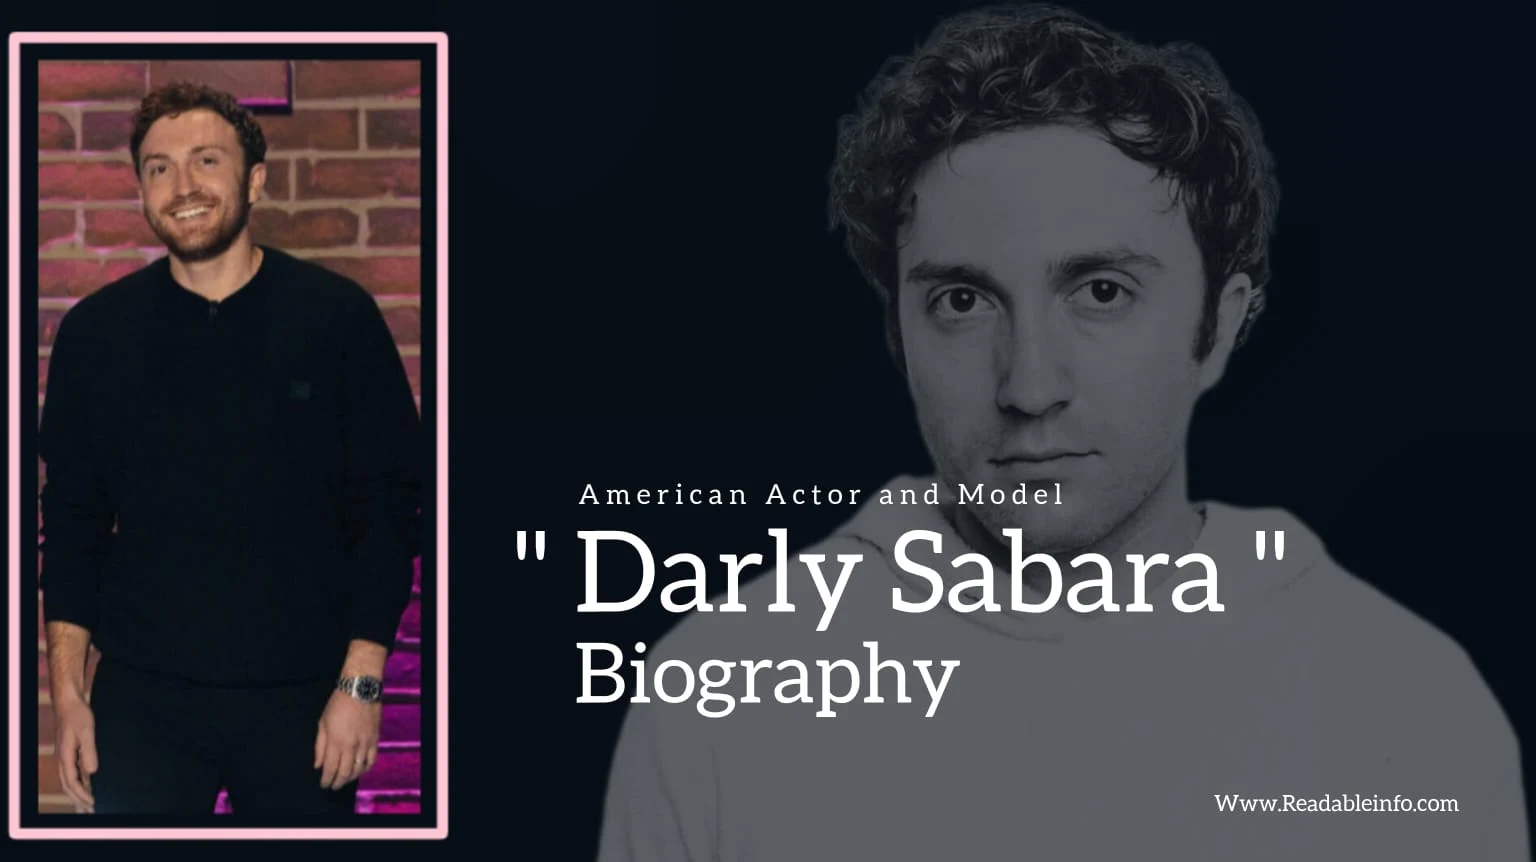 You are currently viewing Daryl Sabara Biography (American Actor and Model)